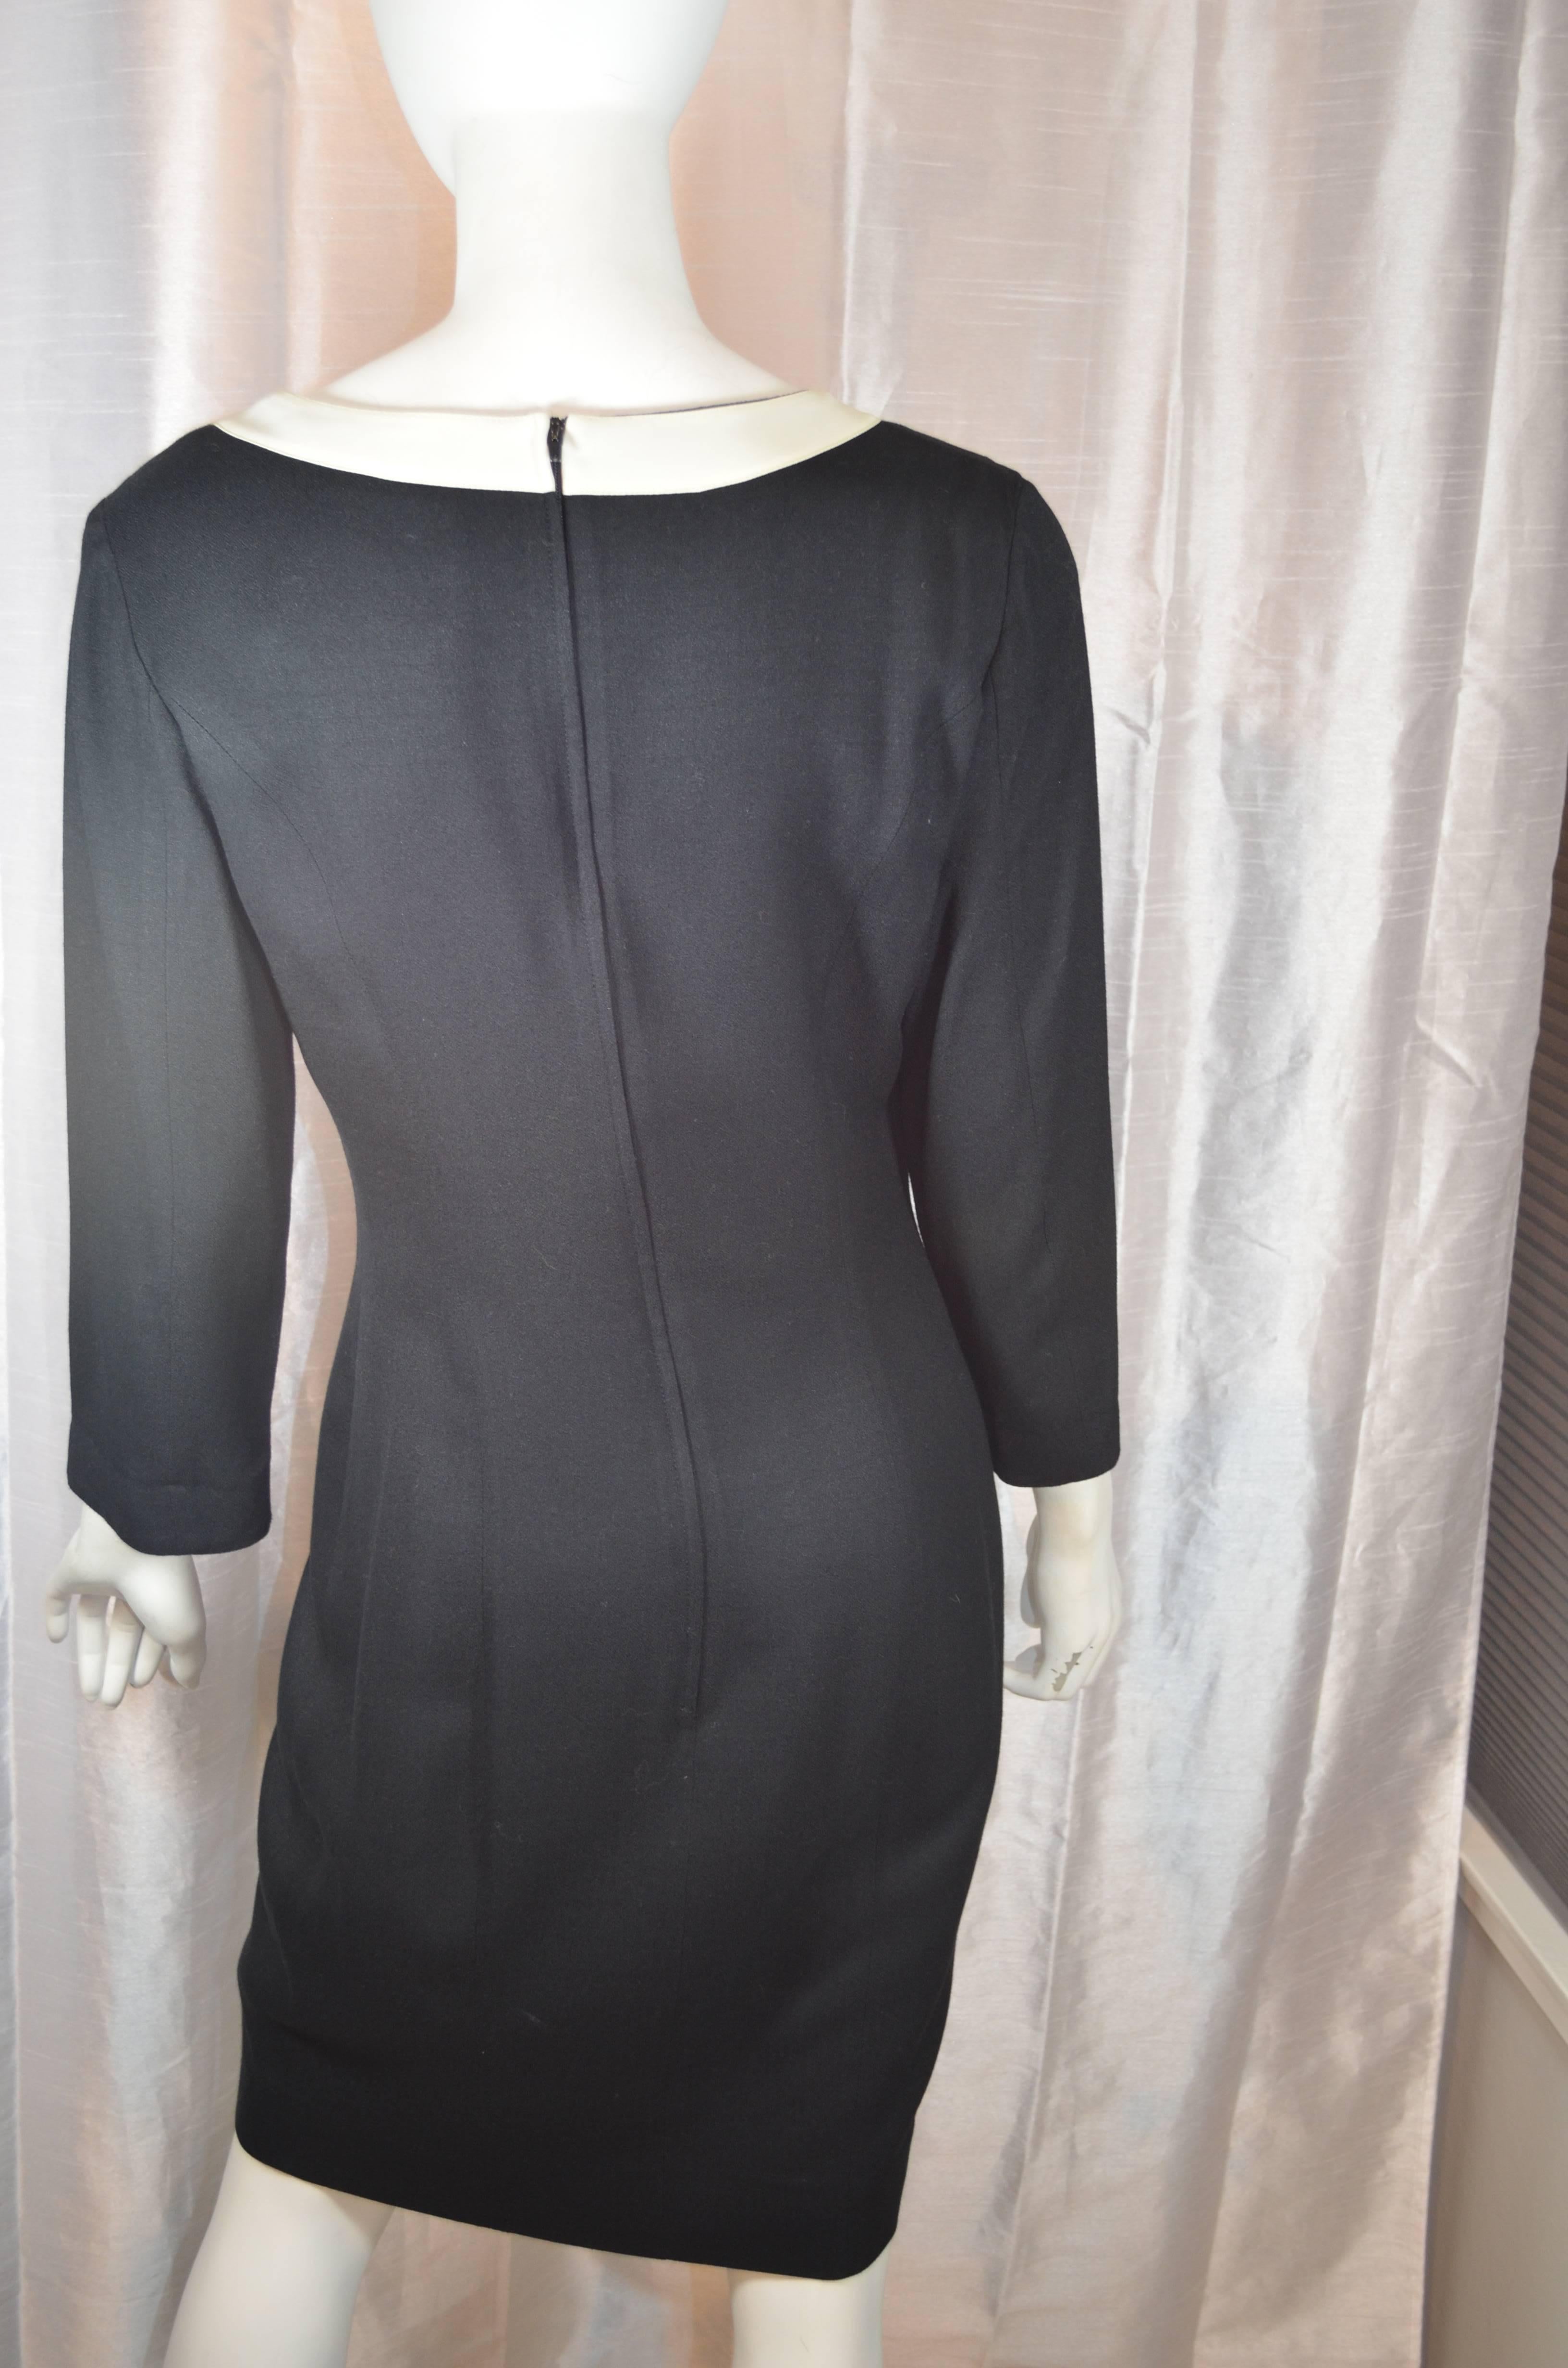 Black Moschino Couture Question Mark Dress 1988-89 For Sale